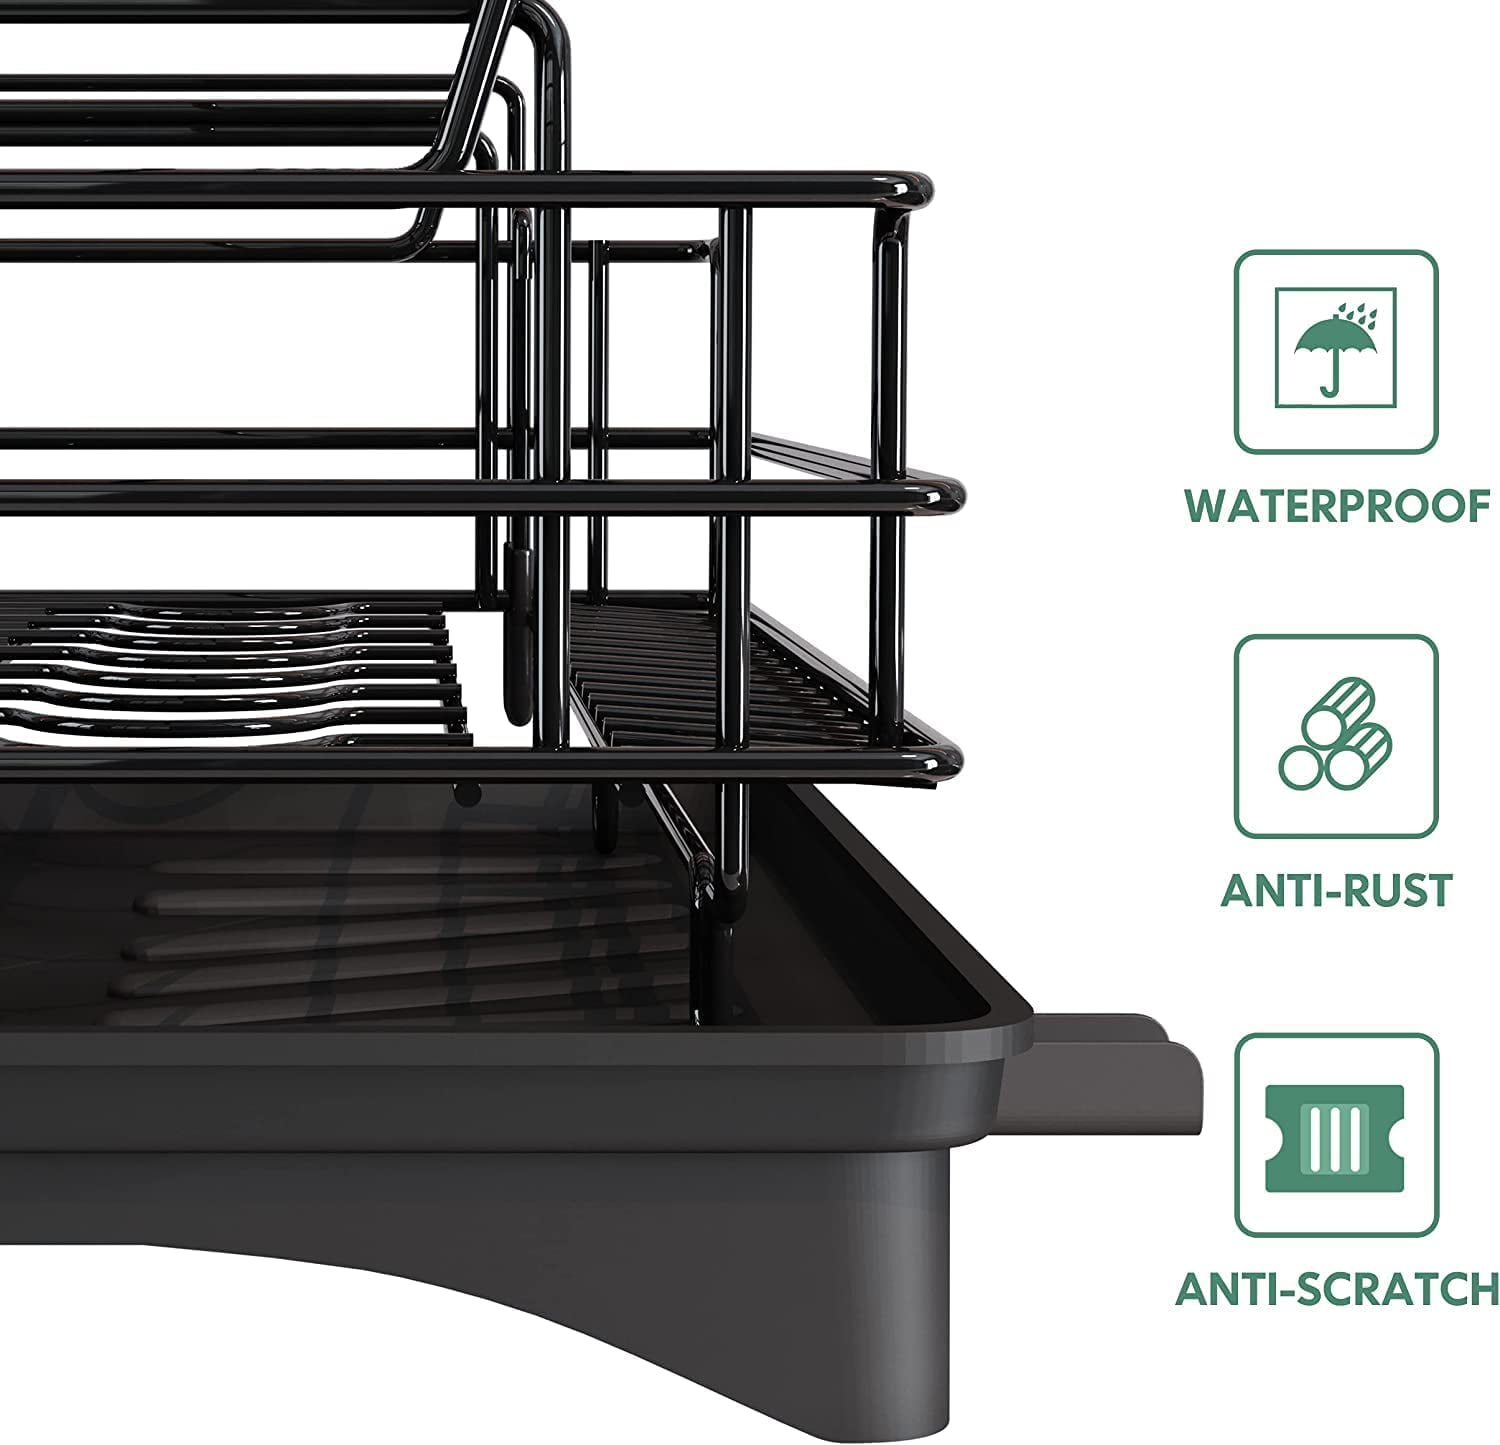 AIDERLY Iron Dish Drying Rack with Drainboard Dish Drainers for Kitchen  Counter Sink Adjustable Spout Dish Strainers with Utensil Holder and Knife